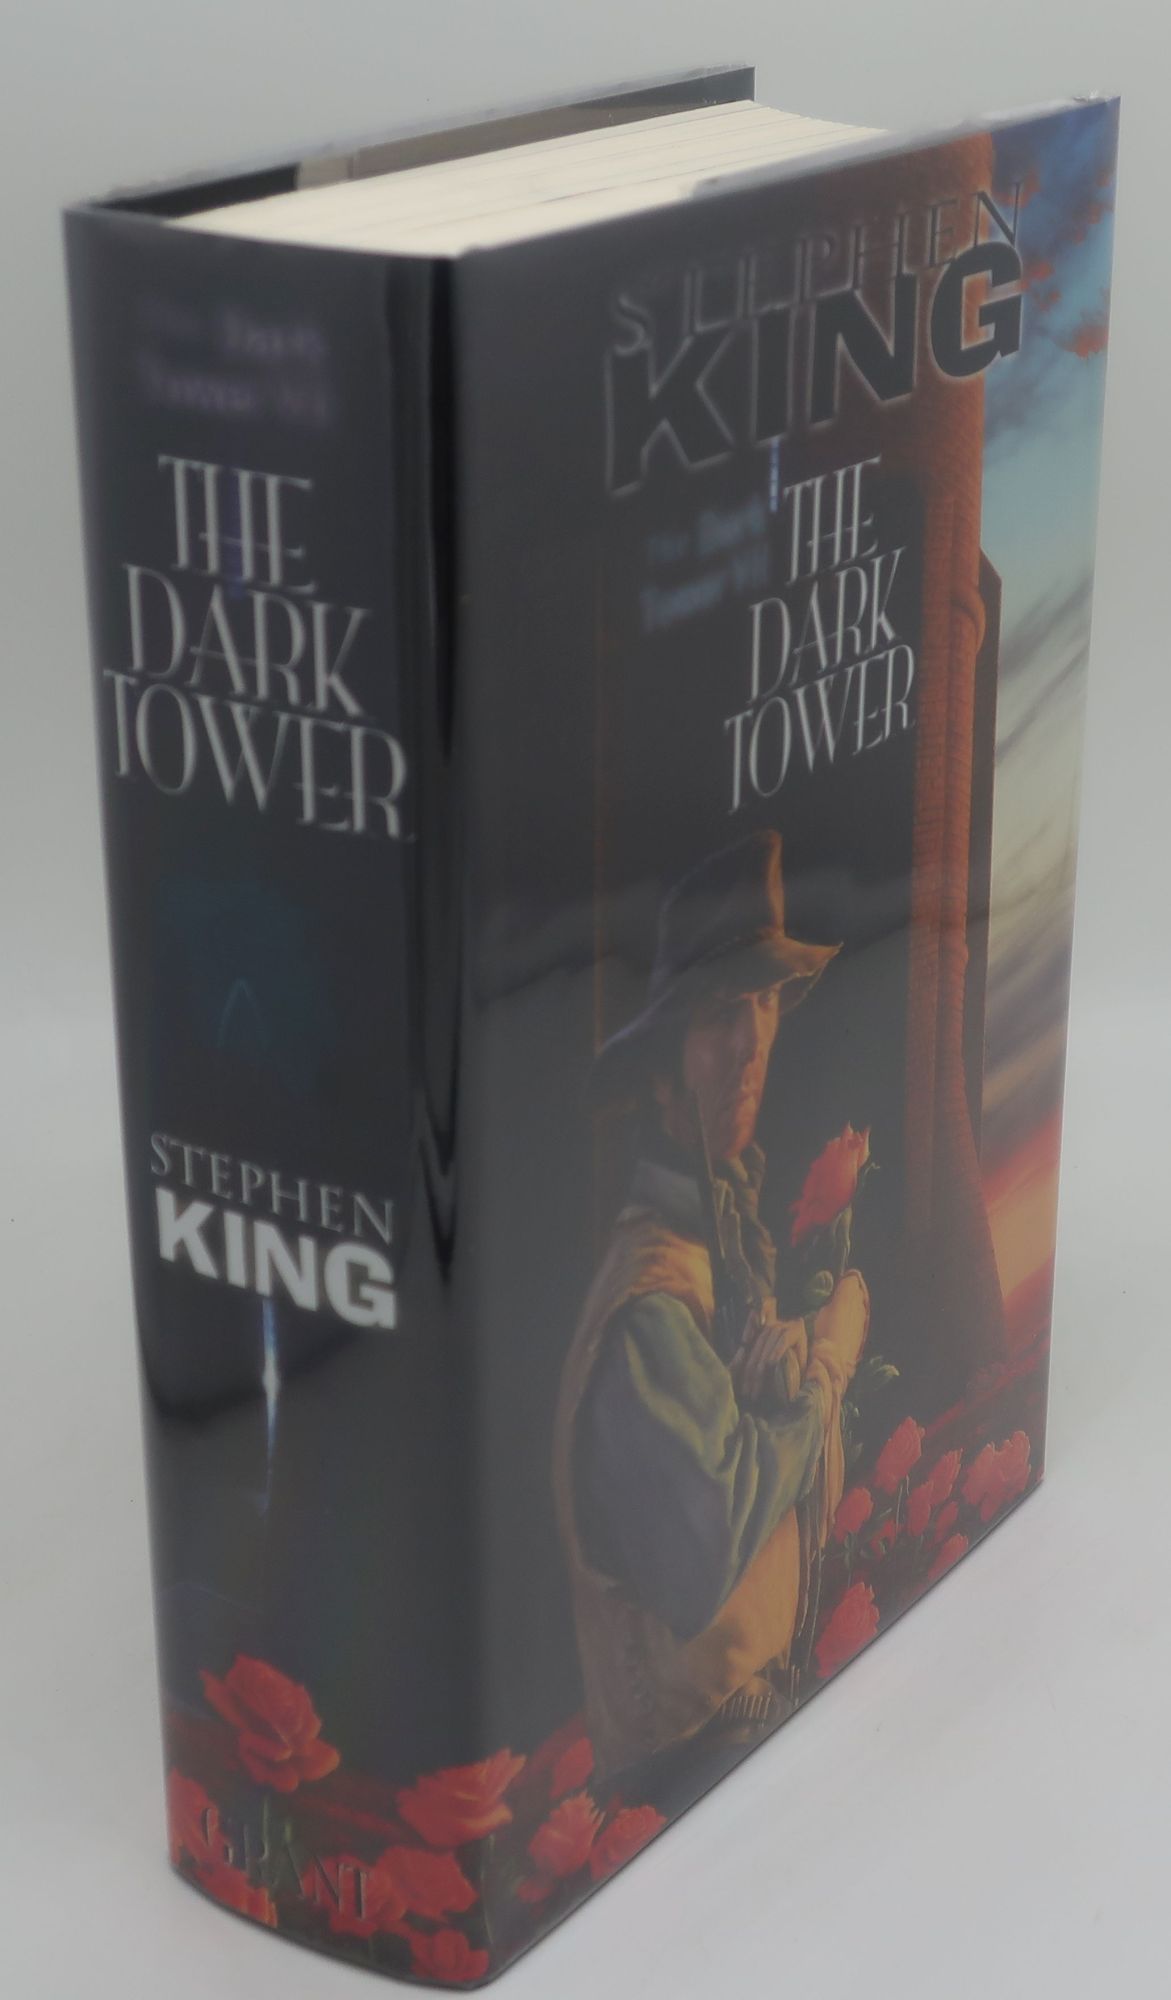 THE DARK TOWER VII [SIGNED BY ILLUSTRATOR] - STEPHEN KING